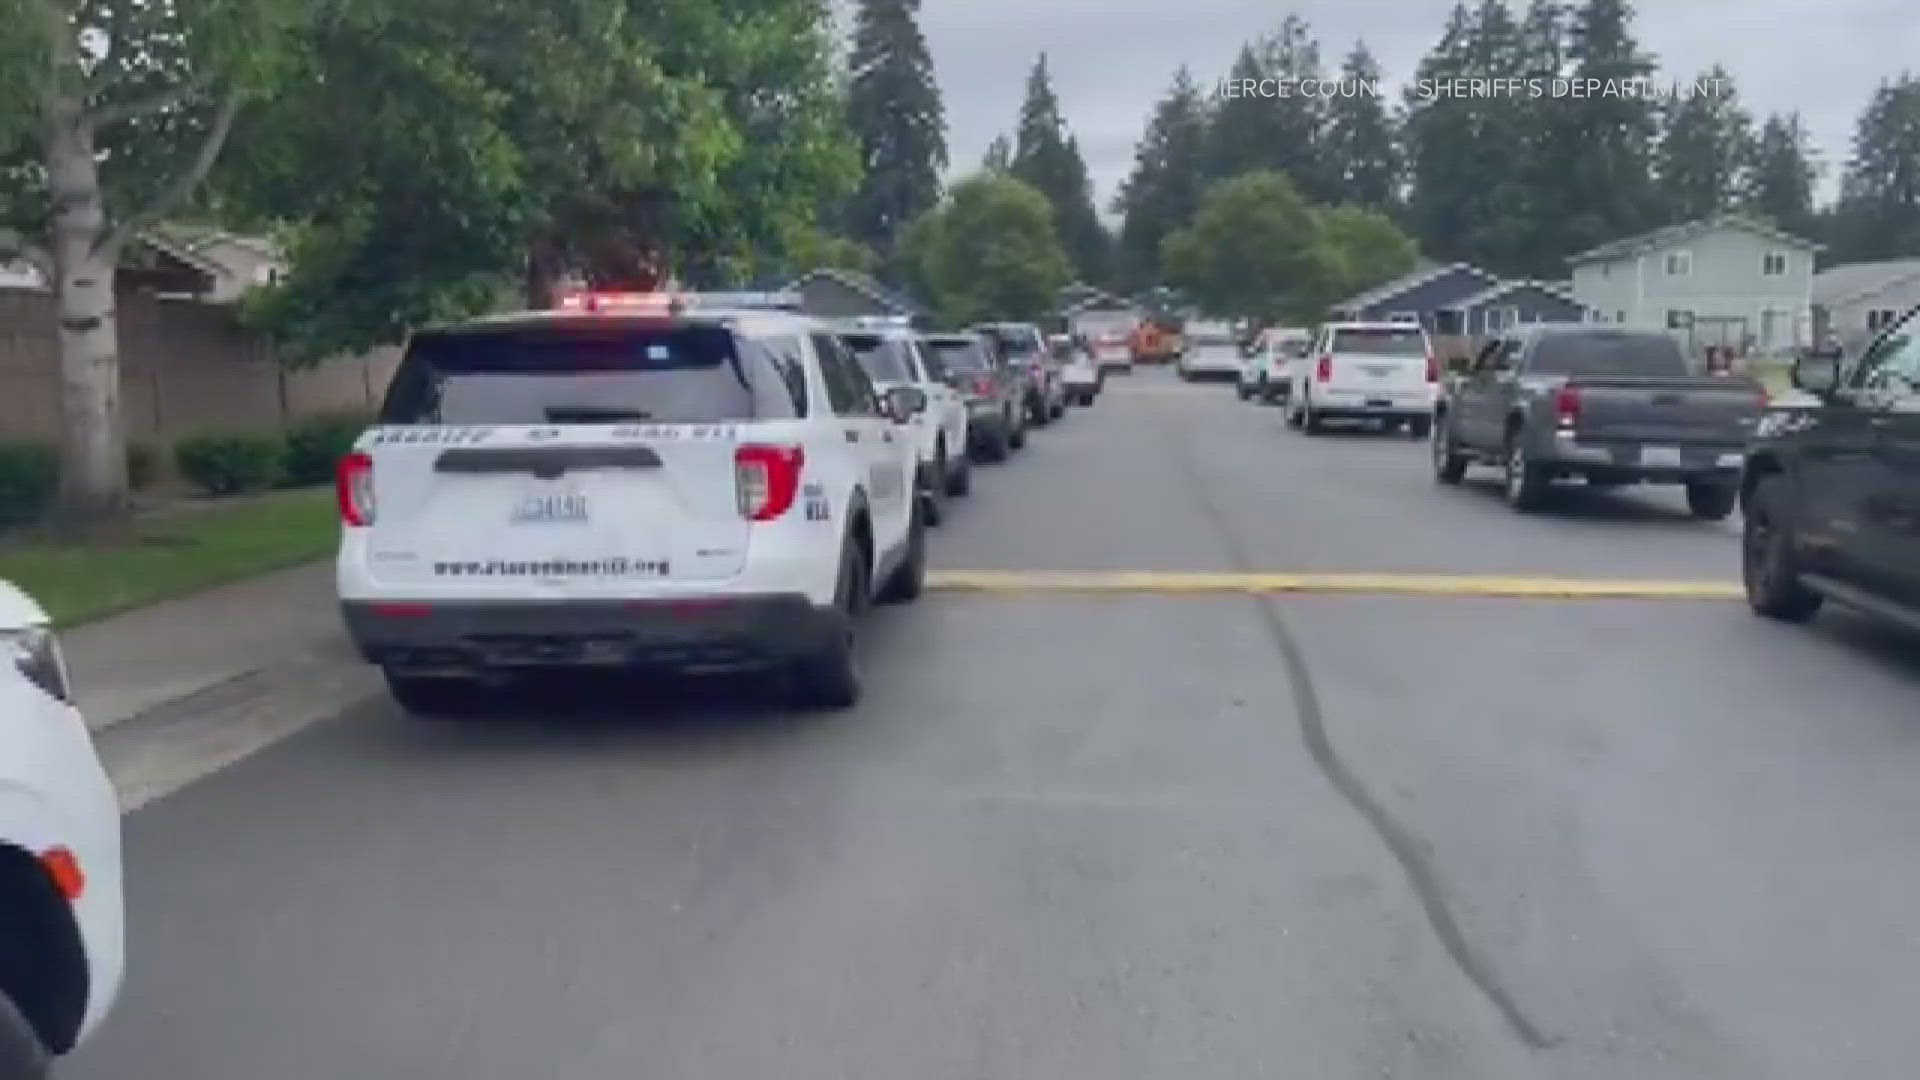 The suspect first fired shots at WSP troopers who attempted to pull him over for a traffic stop, then led them on a car chase